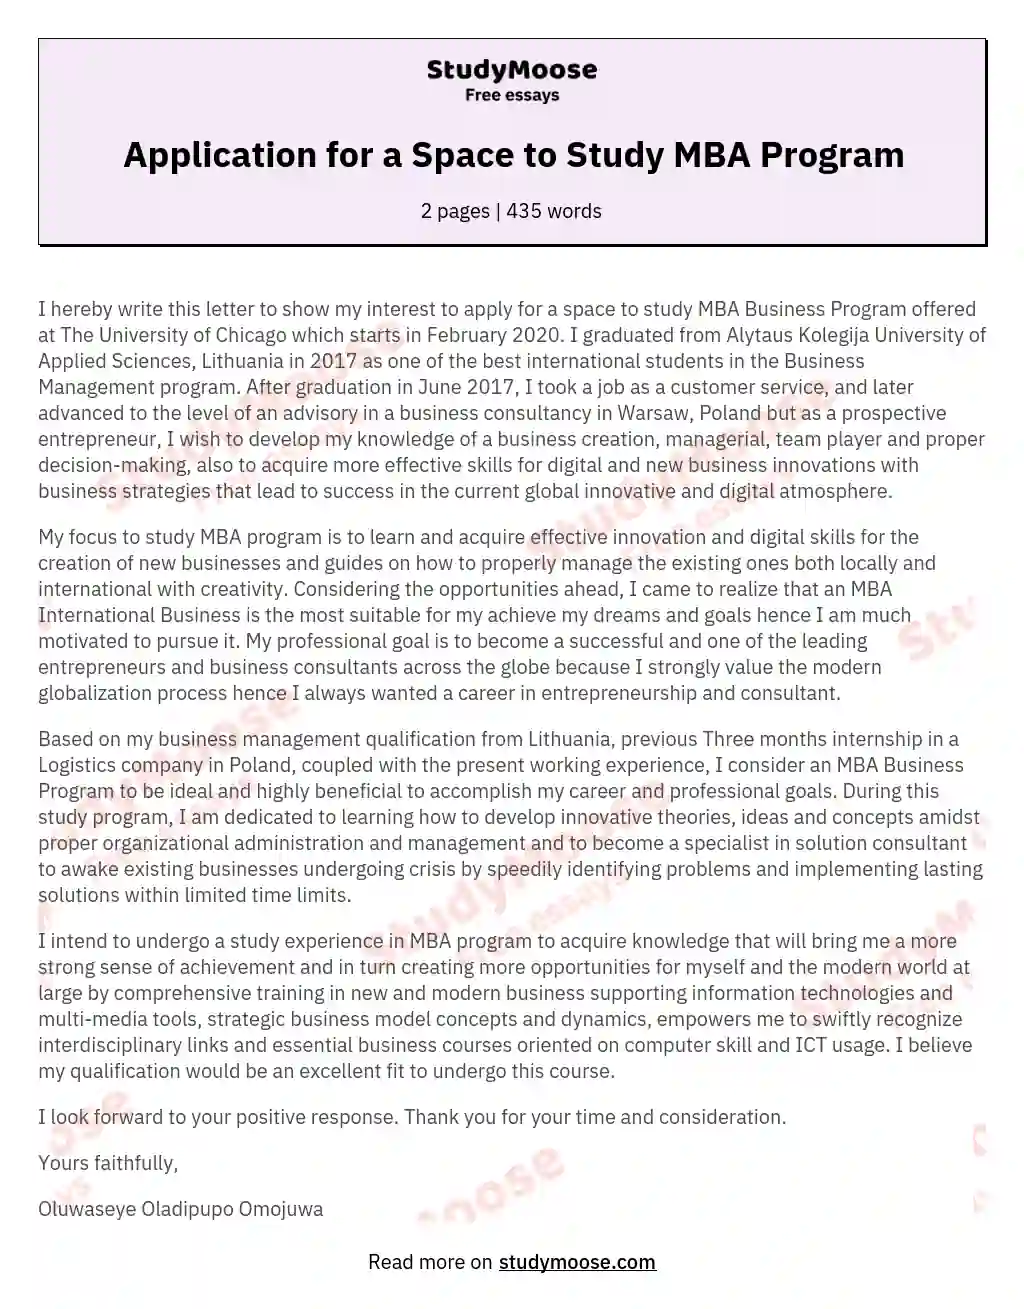 Application for a Space to Study MBA Program